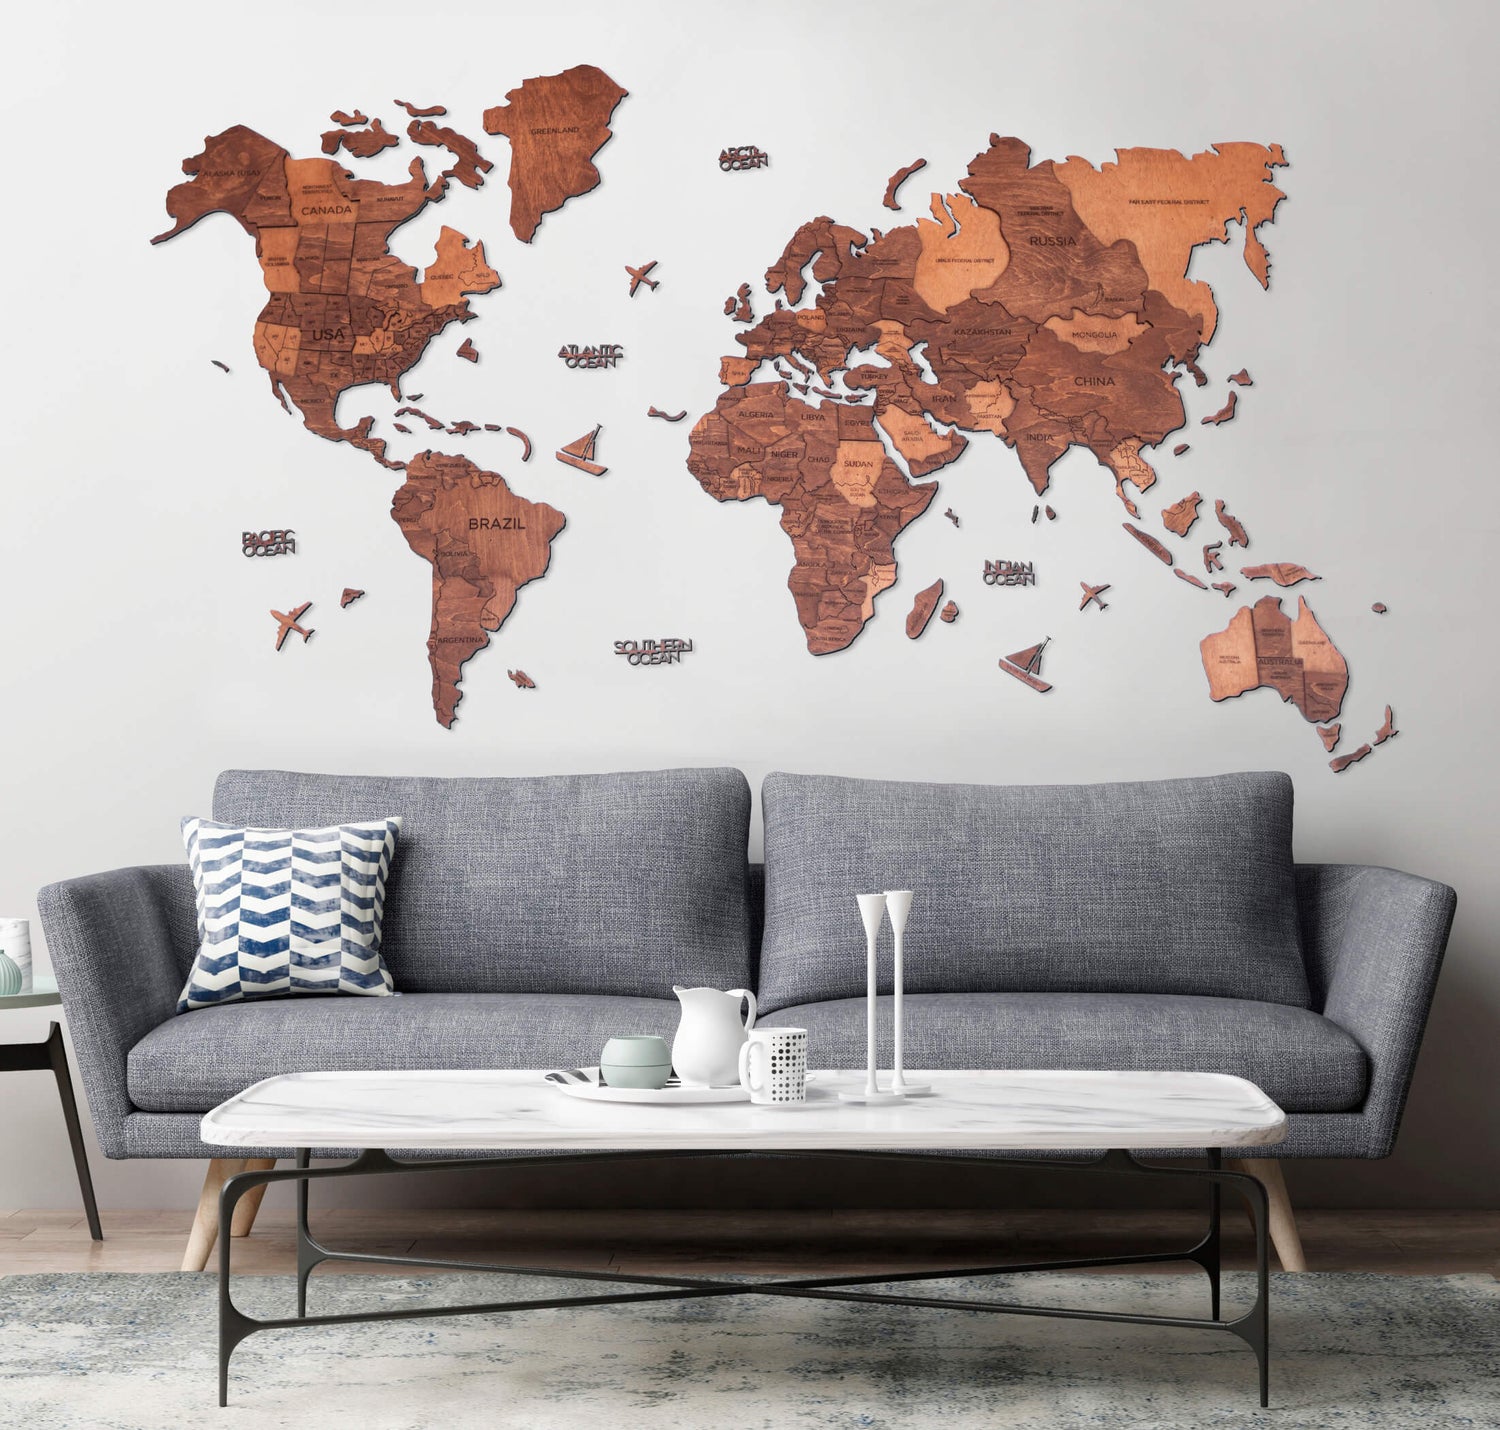 3D Wooden World Map  Wood Map for Your Home